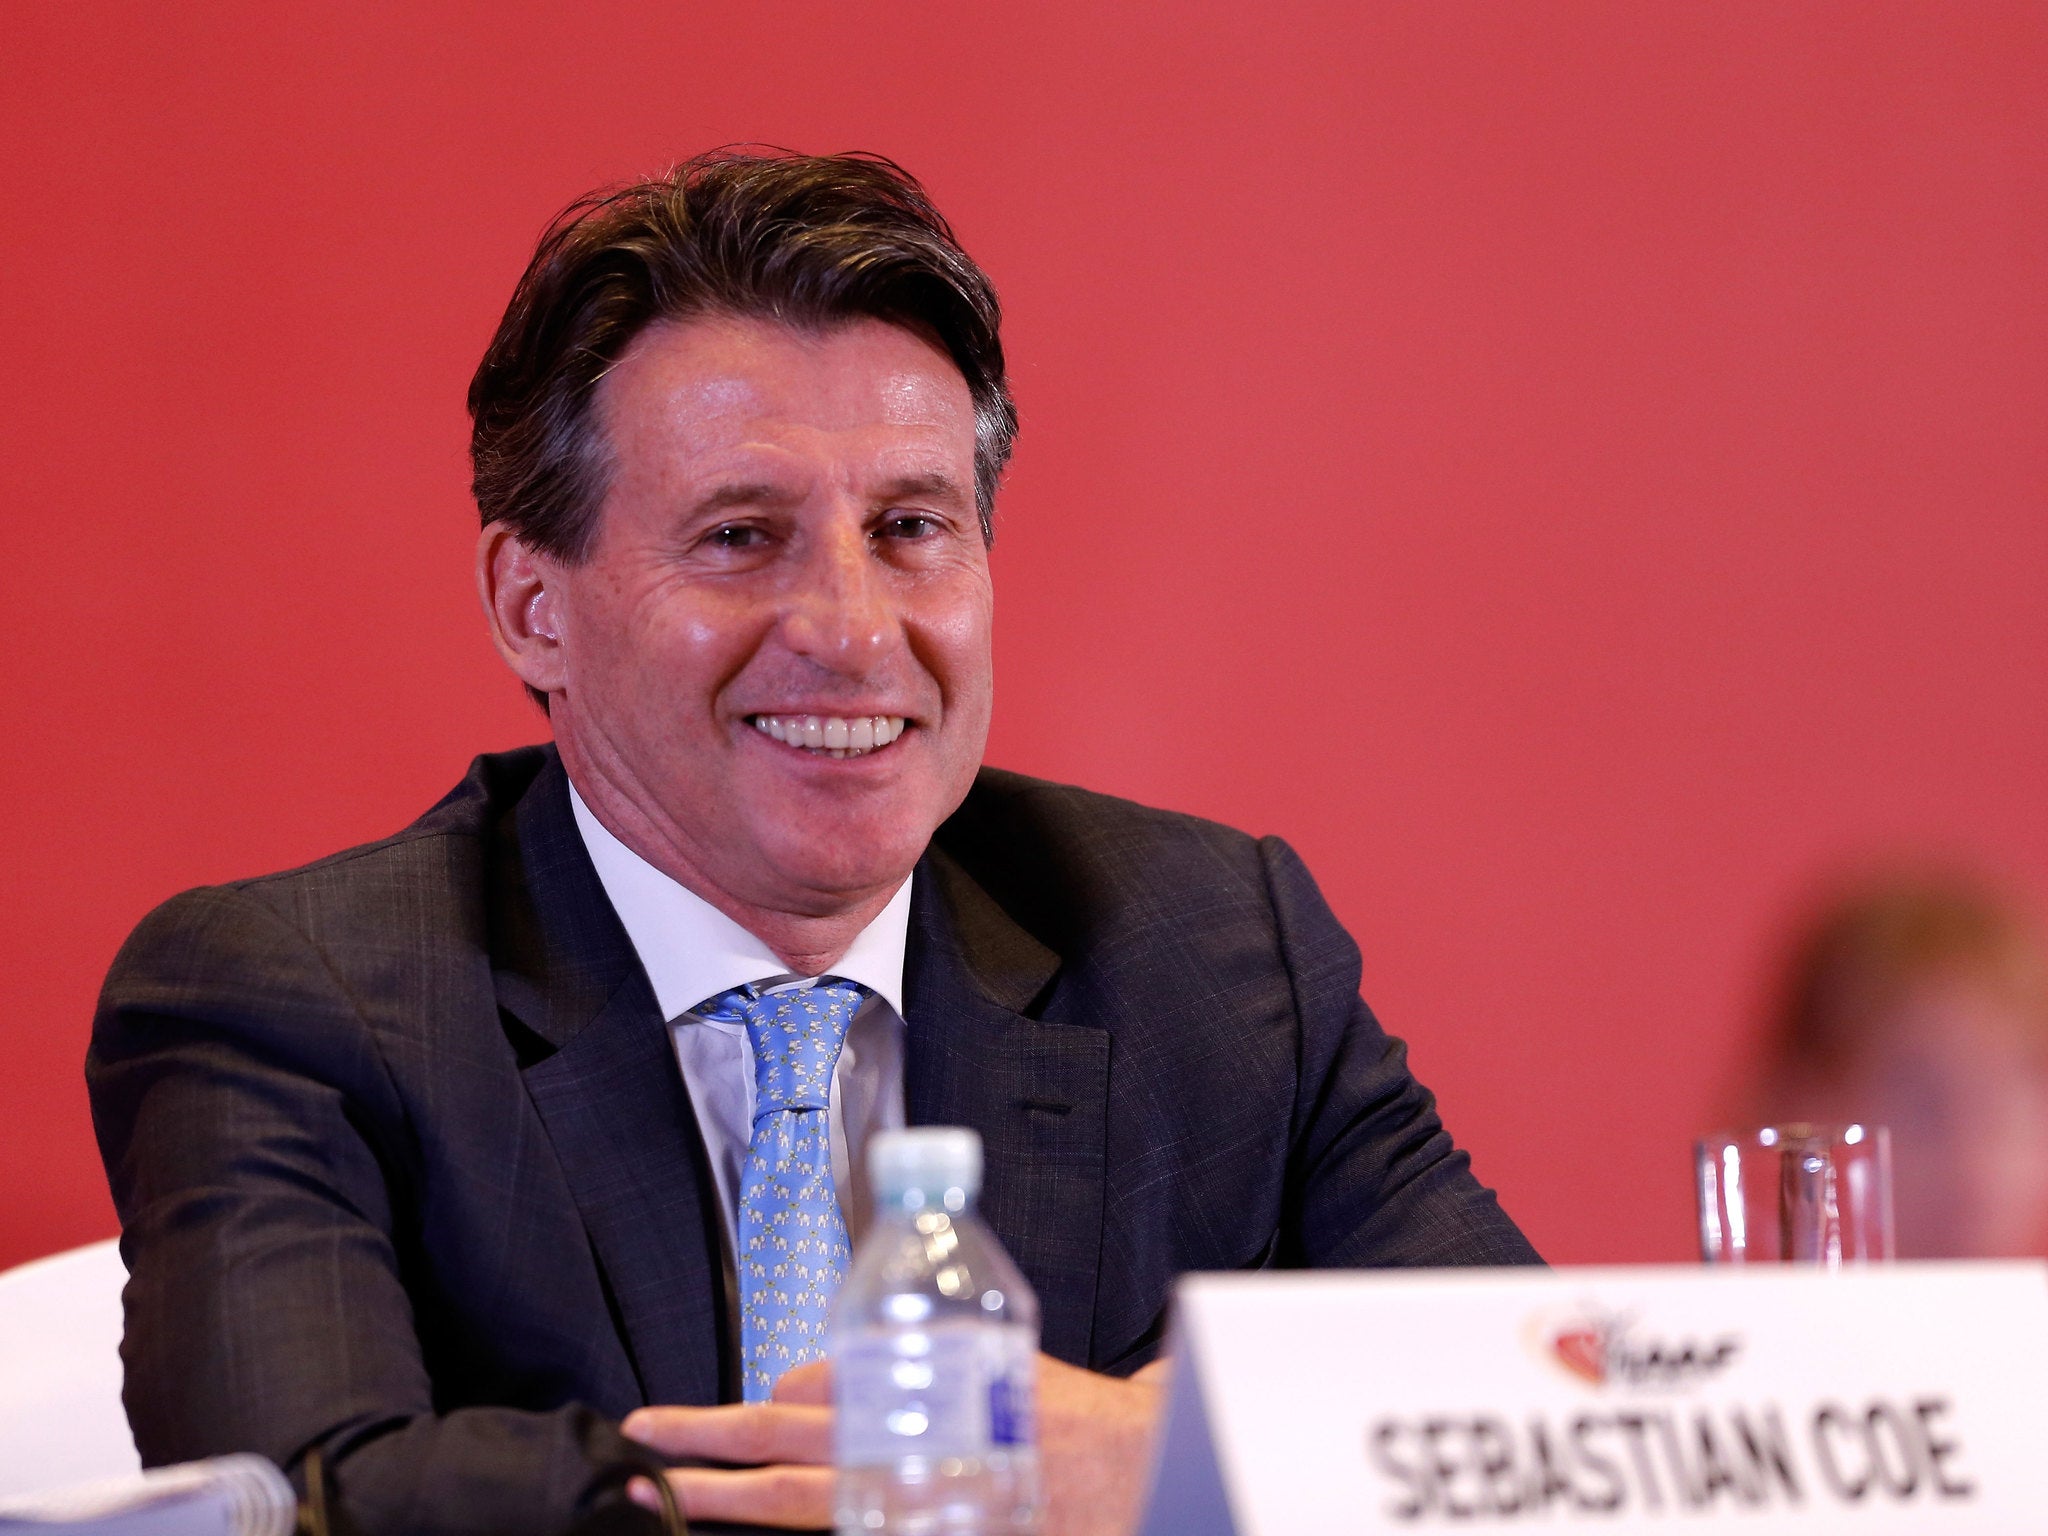 The UK's Lord Coe reacts to being named IAAF president in Beijing